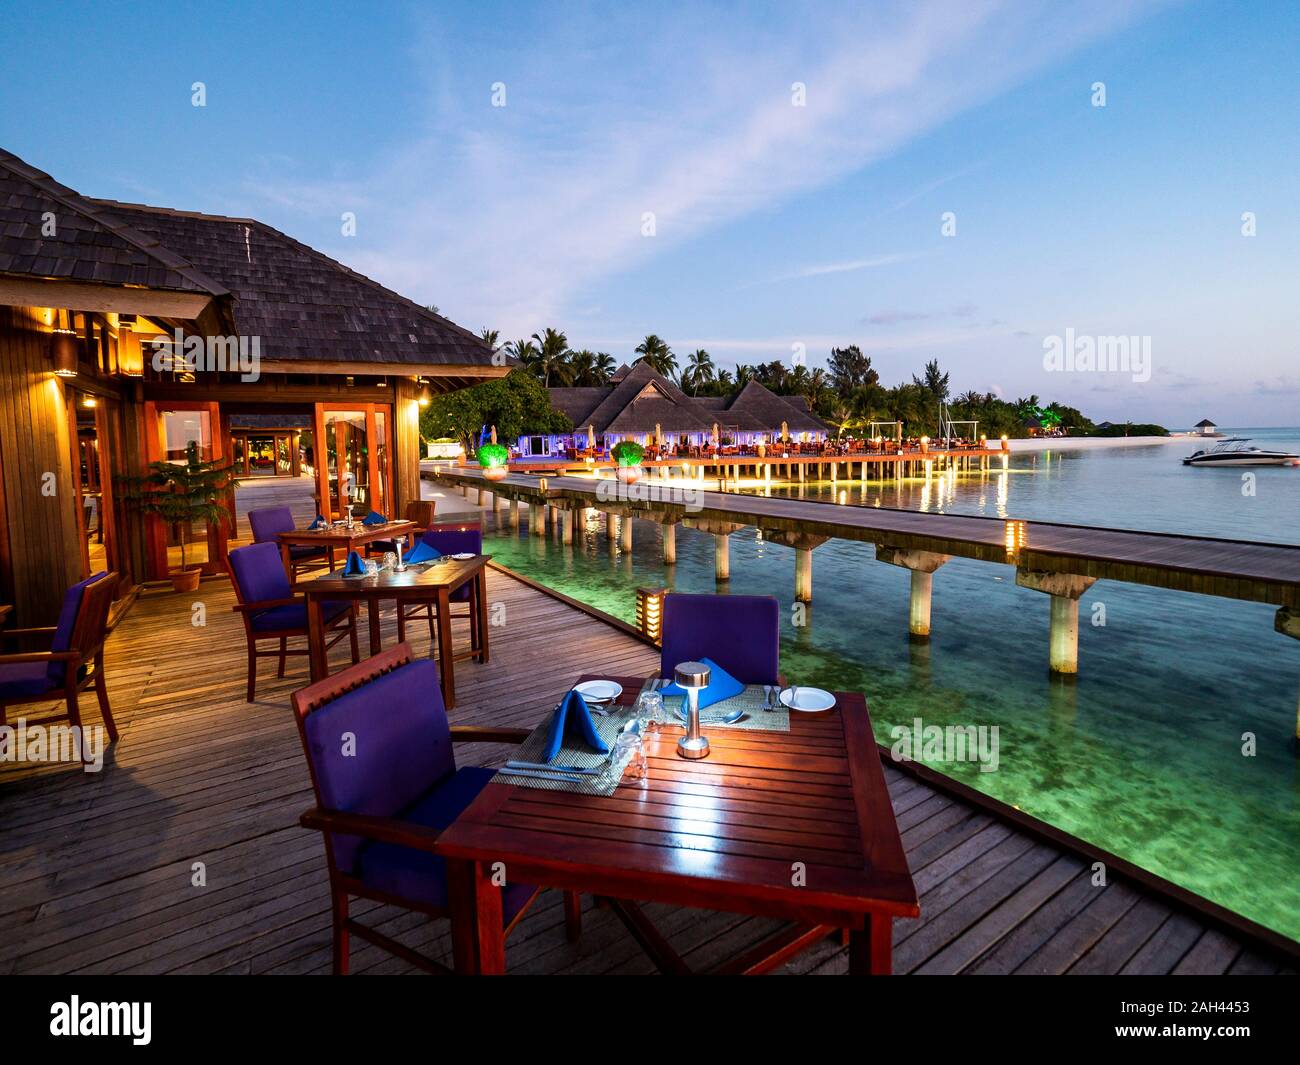 Maldives, Dining tables of coastal restaurant at dusk with pier in background Stock Photo